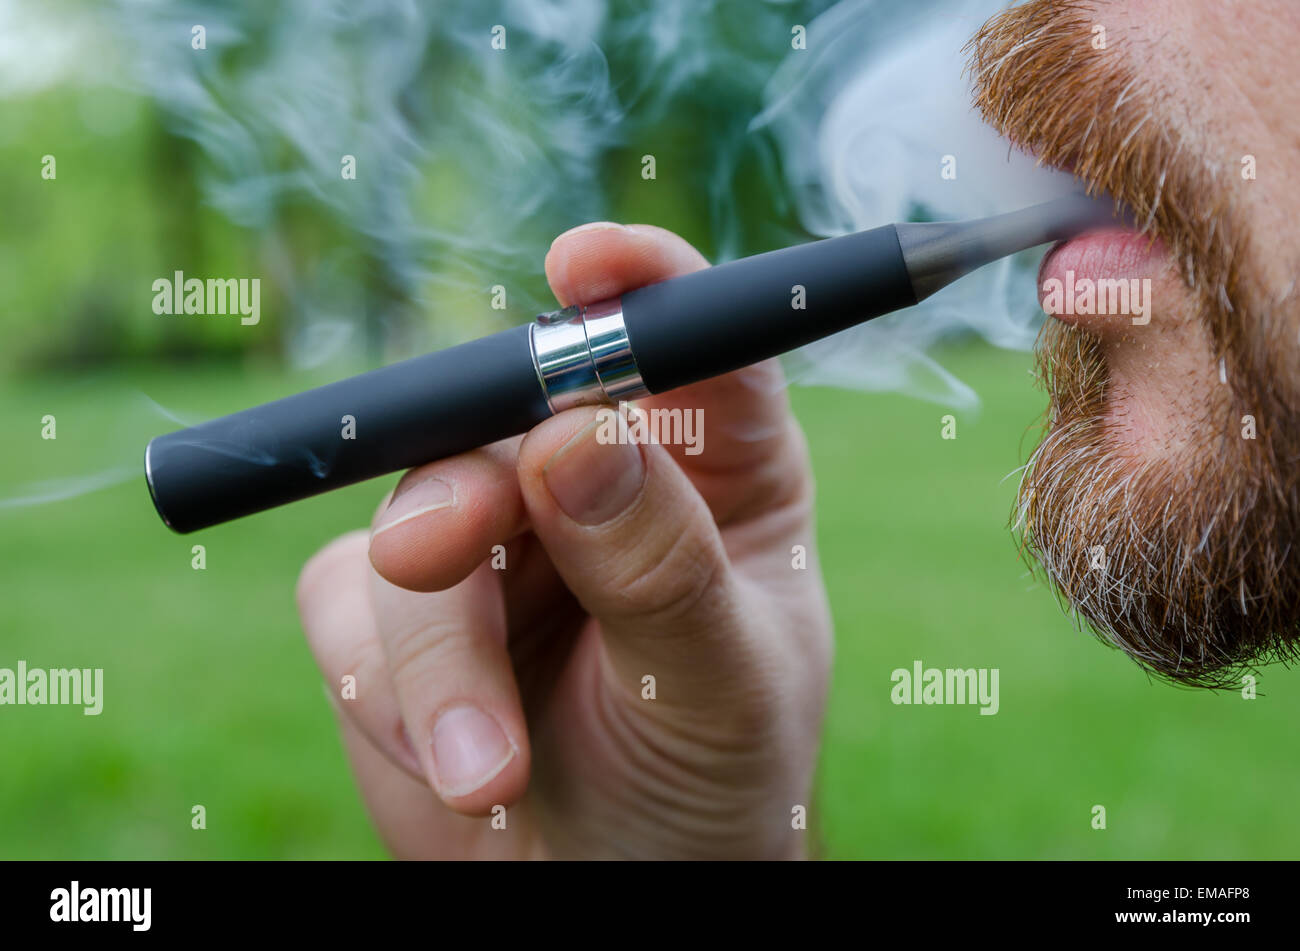 Close-up of a man vaping an electronic cigarette Stock Photo